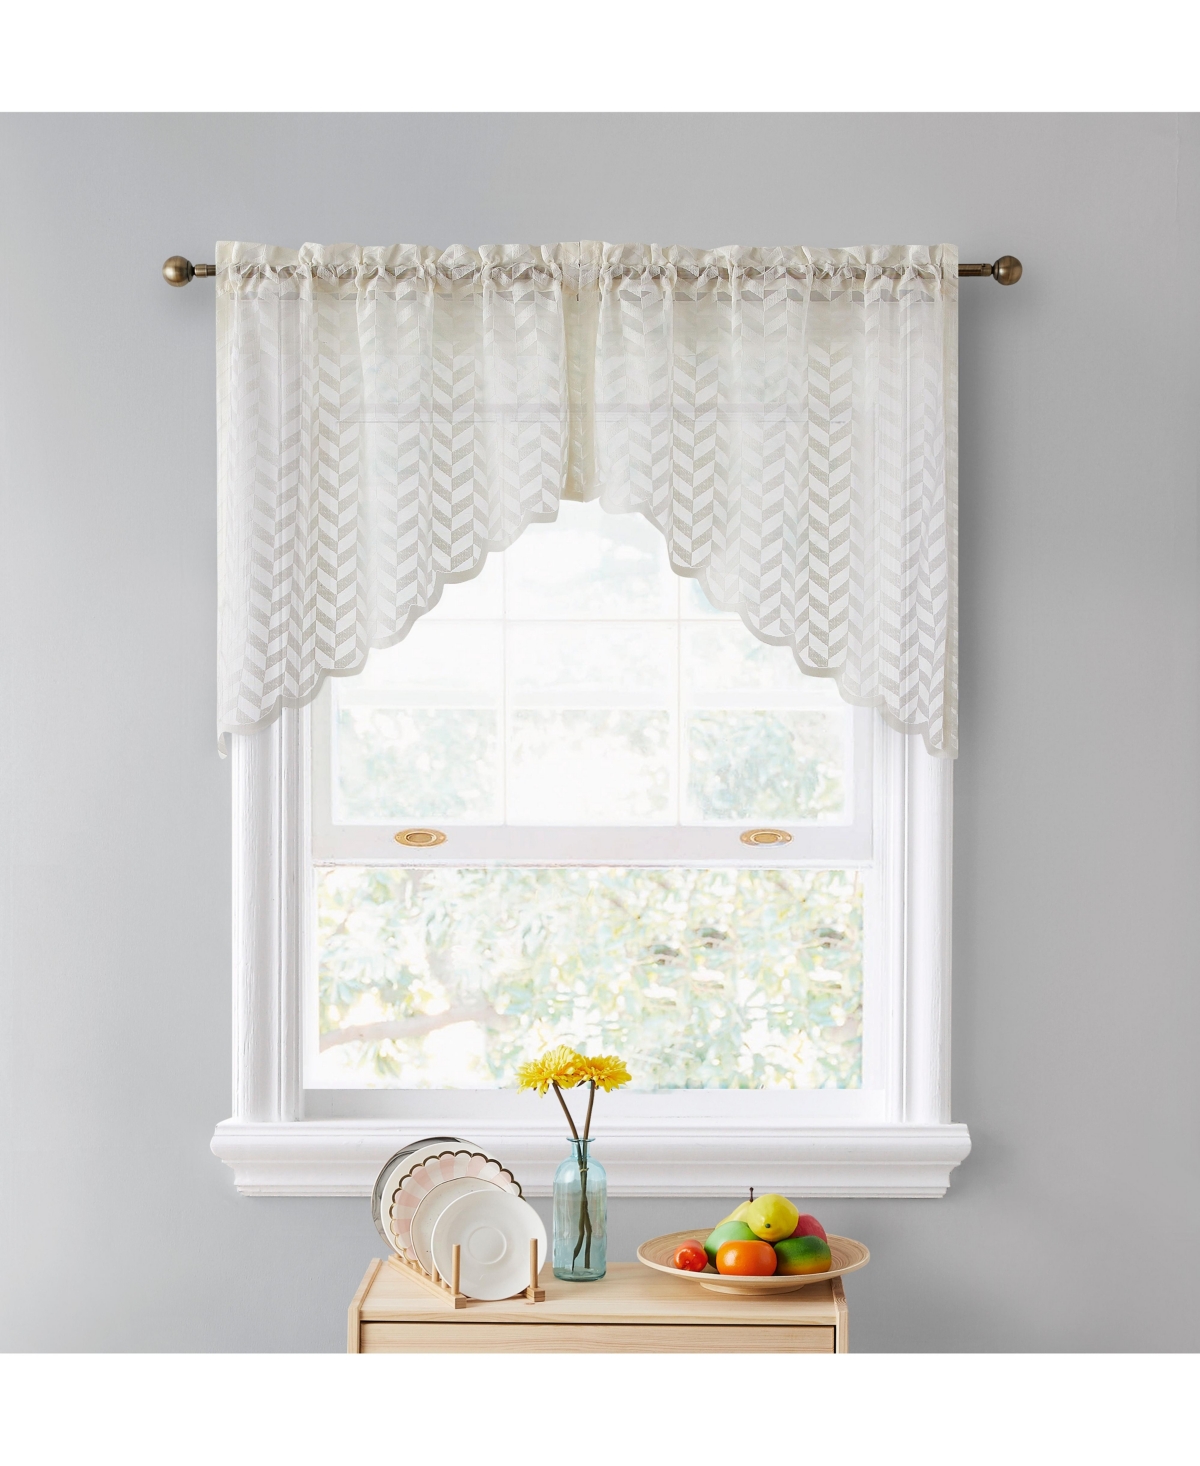 Herringbone Semi Sheer Voile Kitchen Cafe Curtain Panels - Rod Pocket -Swags for Small Windows & Bathroom - Beige